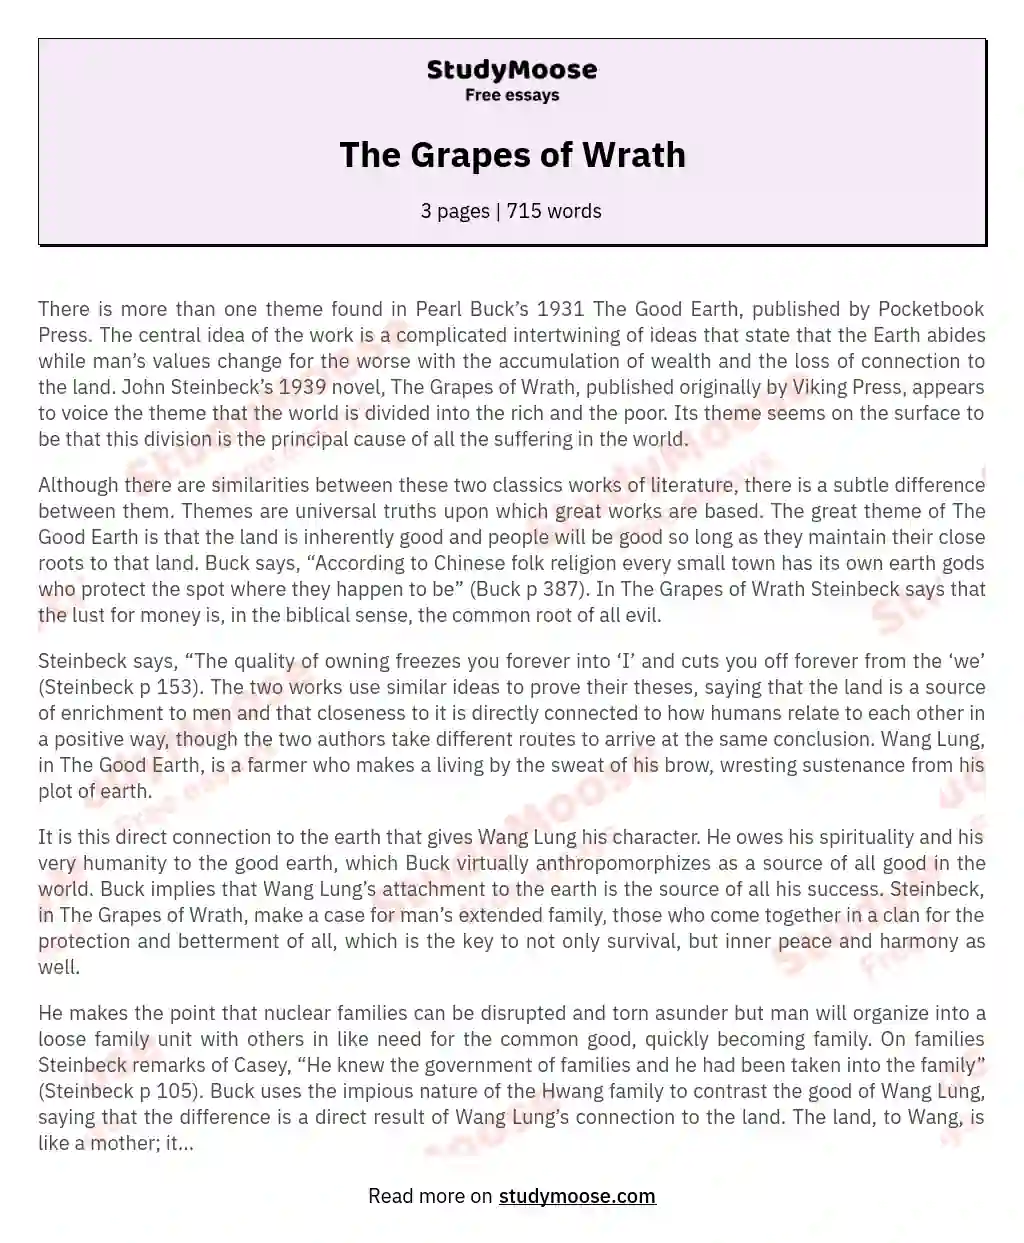 essay about the grapes of wrath